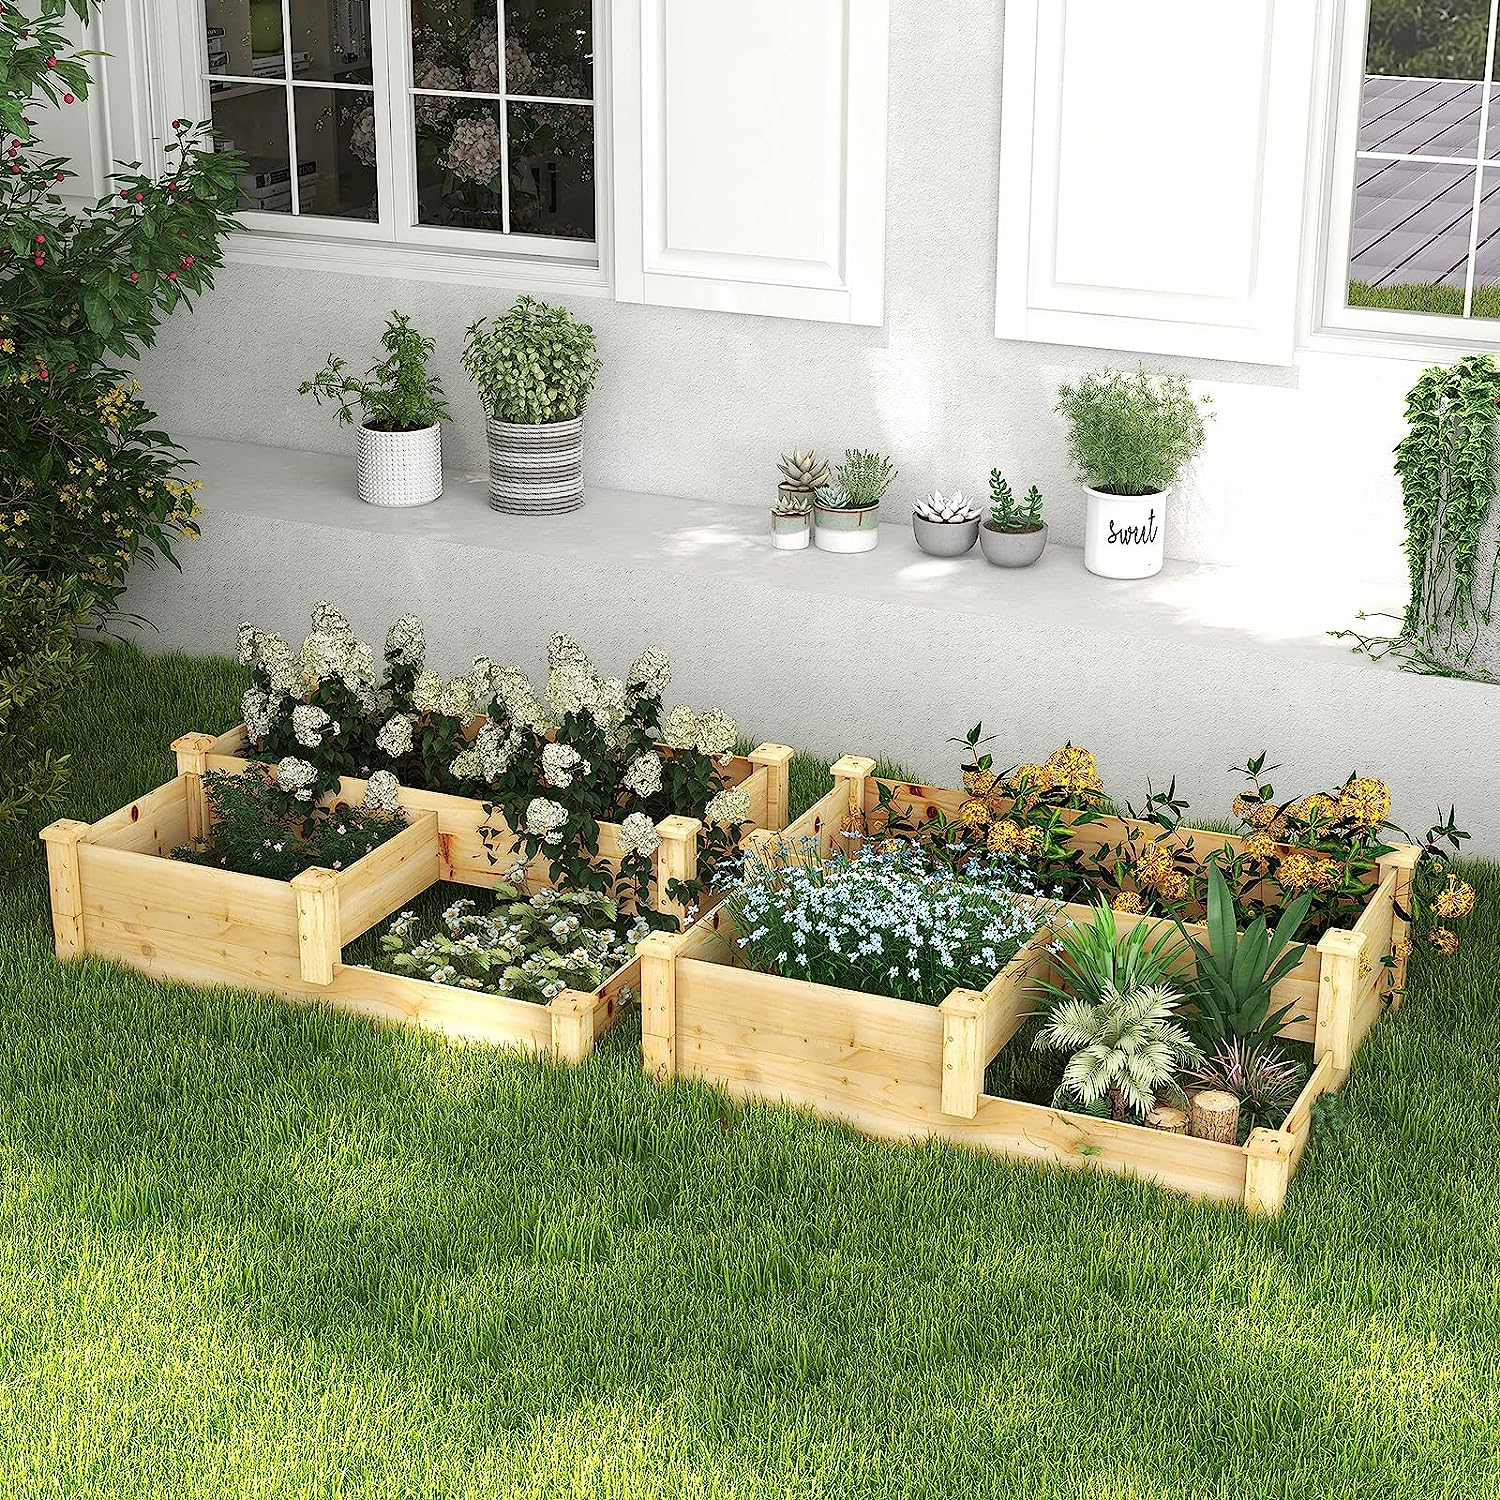 What To Plant In Planter Boxes